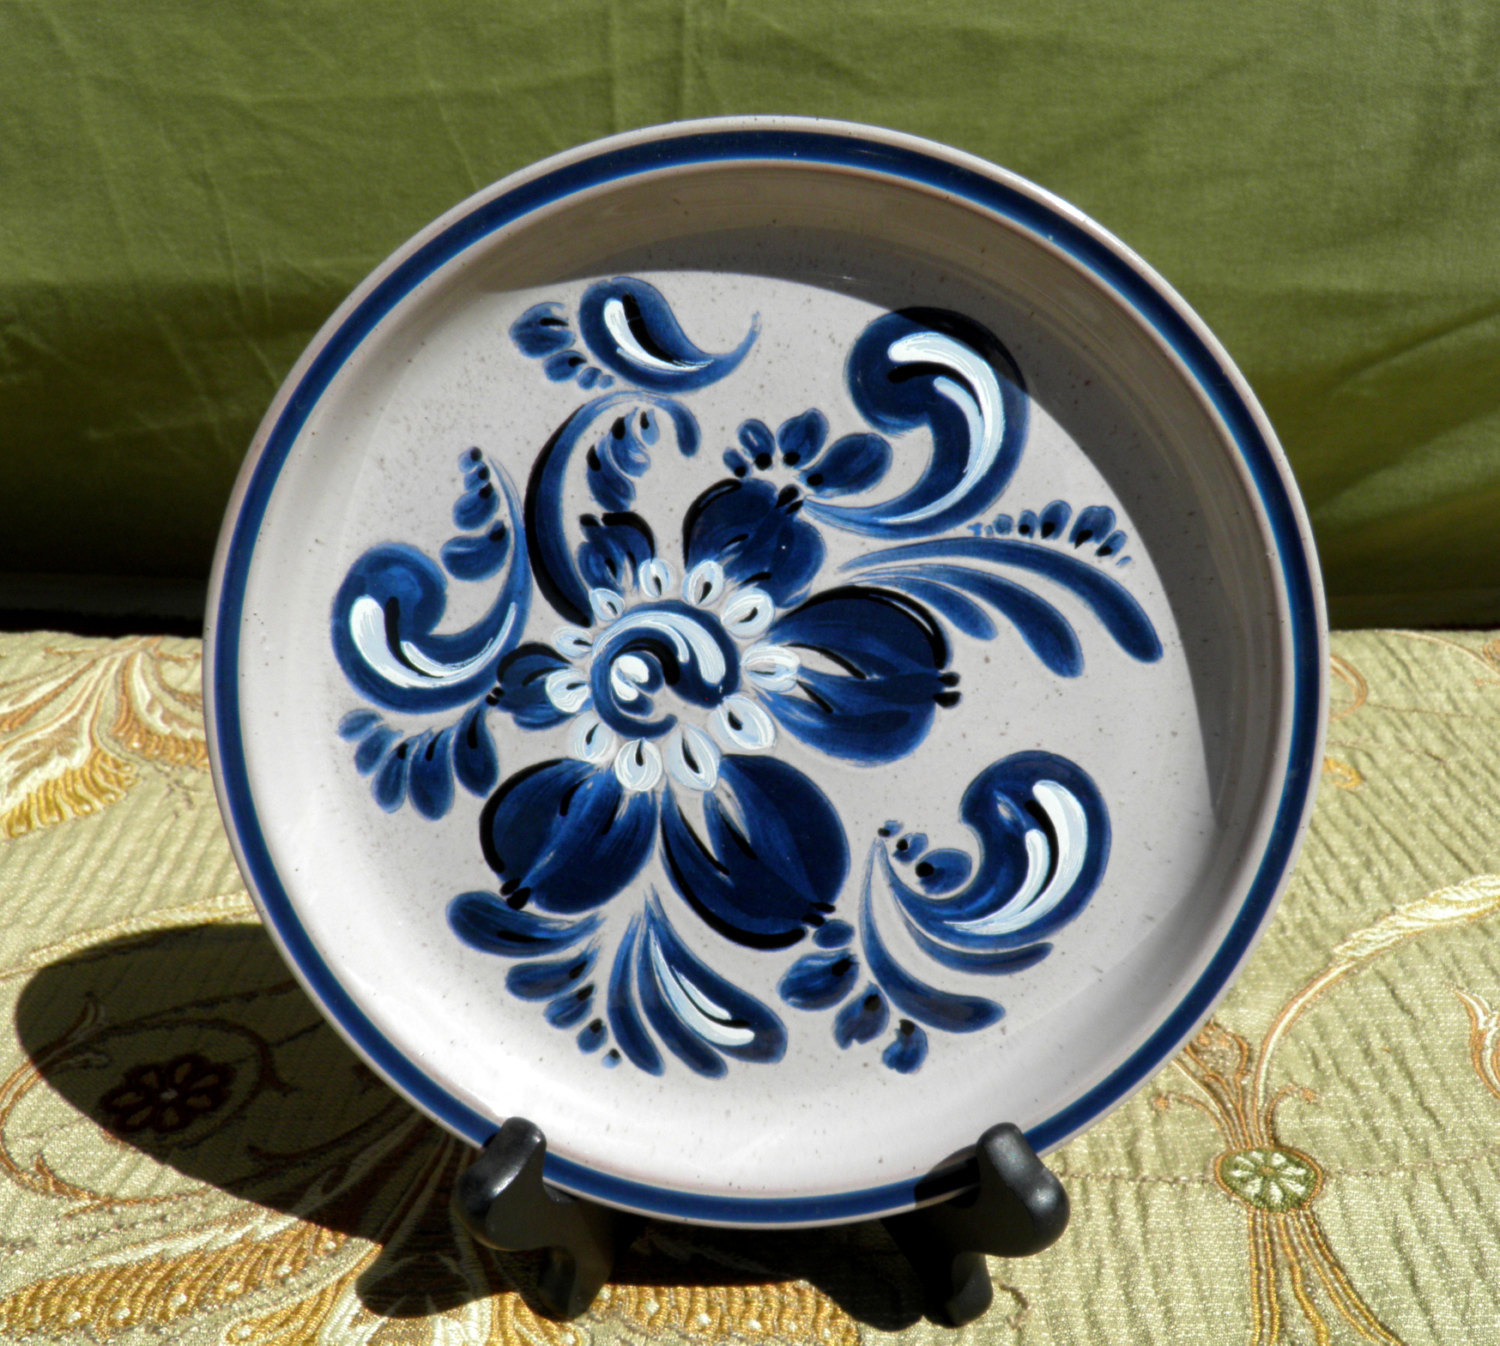 Bavarian Style Red Ware Desert Plates - Saucers - with Floral Motif - Ceramic Re - $40.00